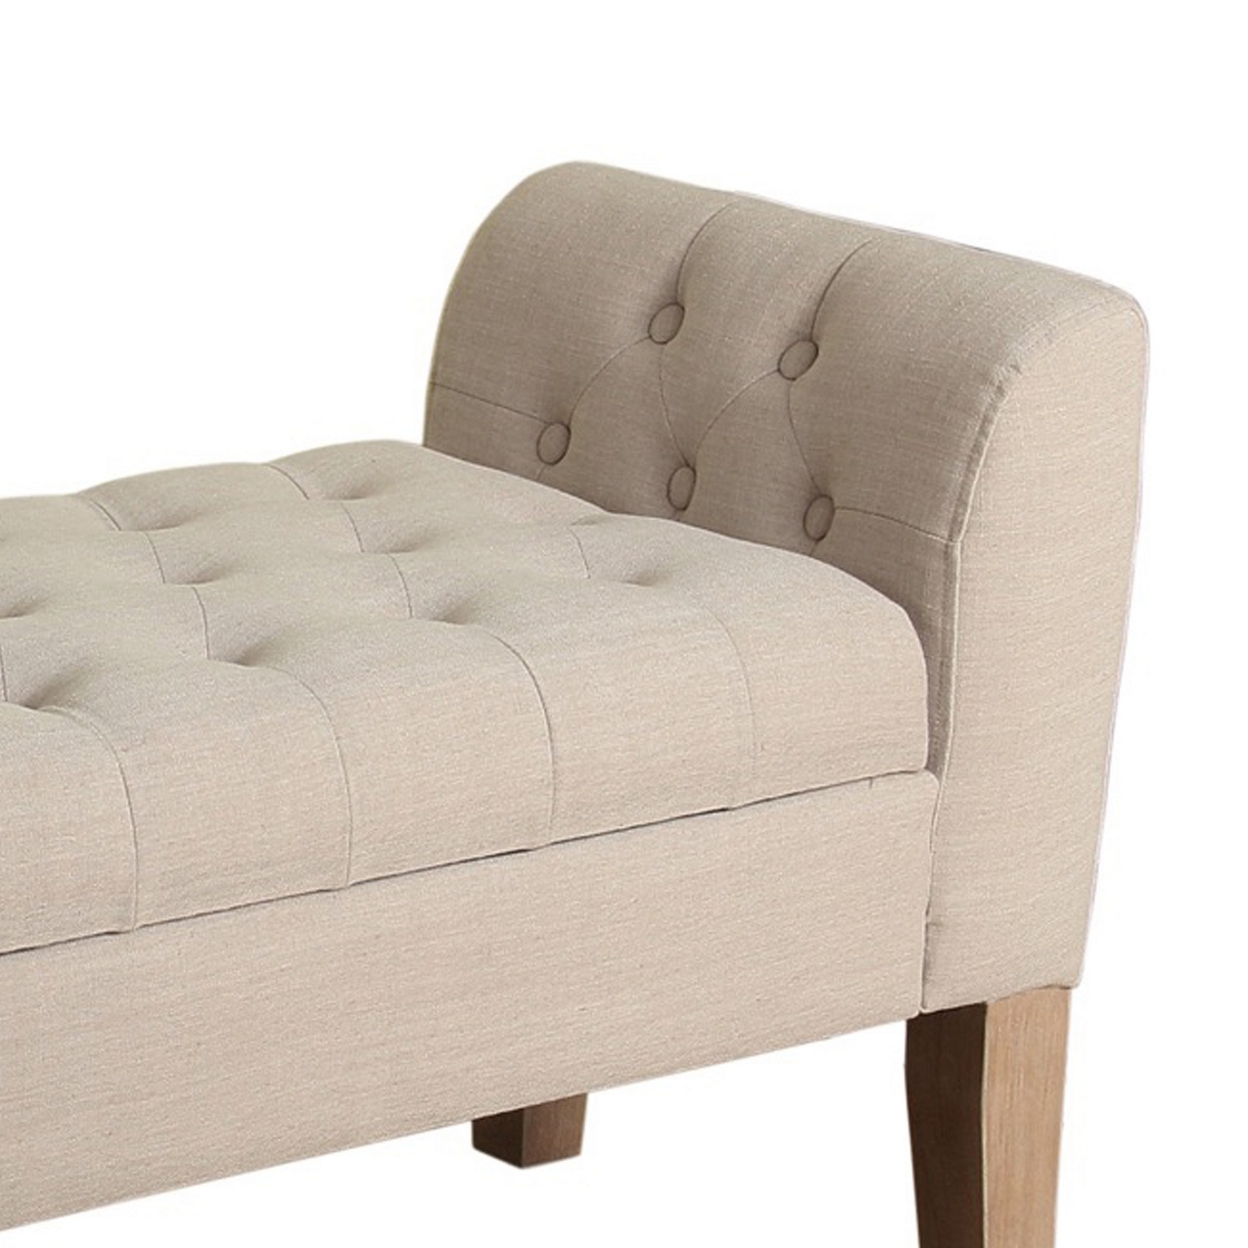 Fabric Upholstered Wooden Bench With Button Tufted Lift Top Storage, Beige- Saltoro Sherpi